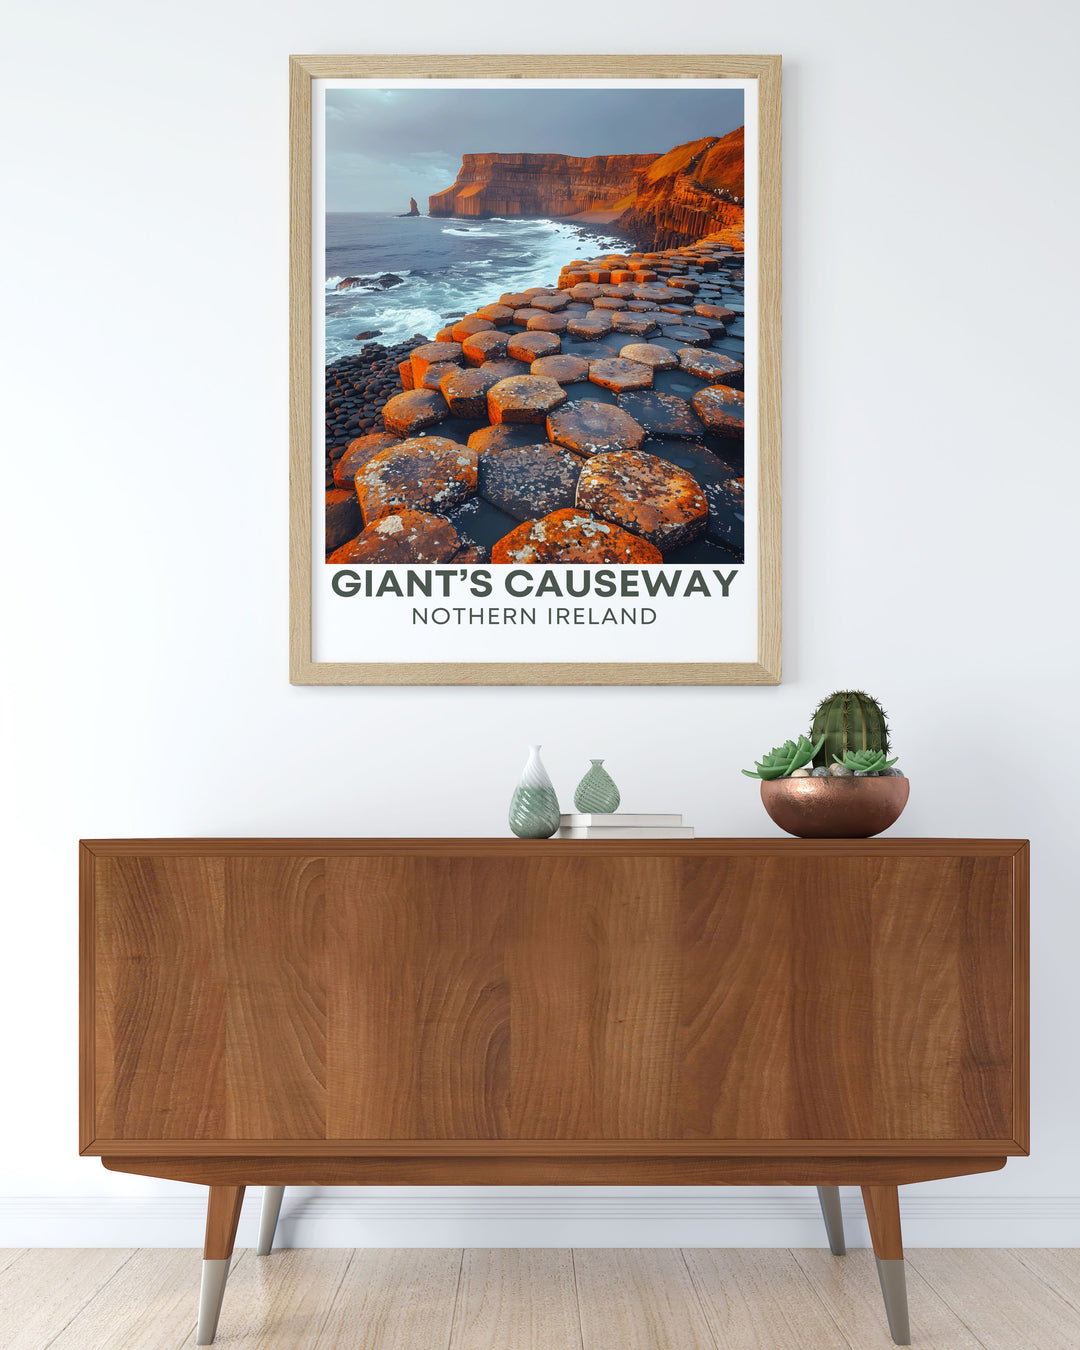 Gallery wall art showcasing the basalt columns of Giants Causeway, capturing the intricate details and unique formations created by volcanic activity, perfect for adding a touch of natural wonder to any home decor.